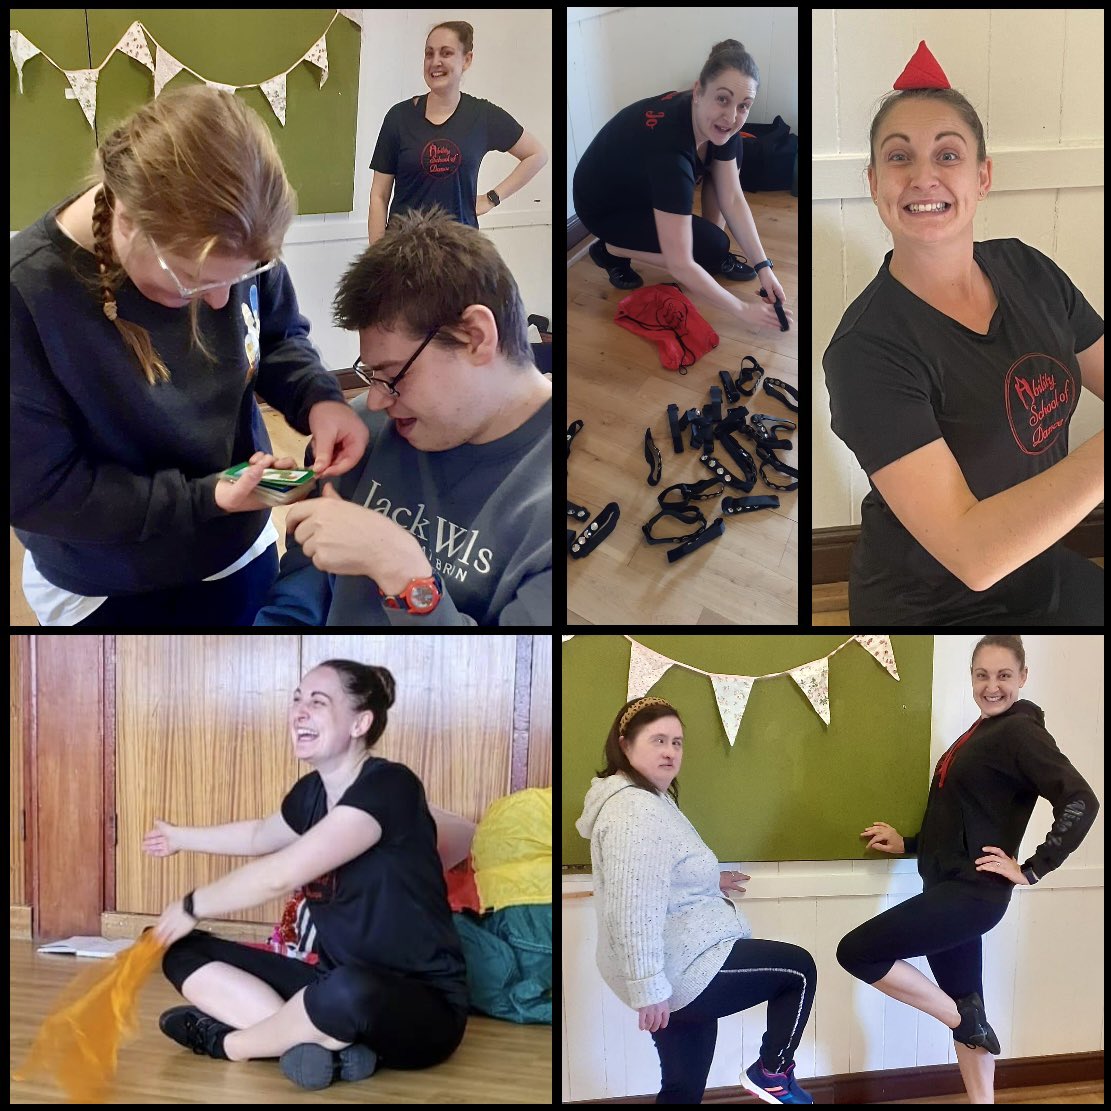 4) Teamwork in Autism Movement Therapy 🙌
5) The many faces of Miss Jo at @Indigoopportun1 ✨
#AbilitySchoolofDance #InternationalDanceDay #Dance #DanceClass #InclusiveDance #AccessibleDance #AdditionalNeeds #Disabled #DisabledDance #Disability #AutismMovementTherapy